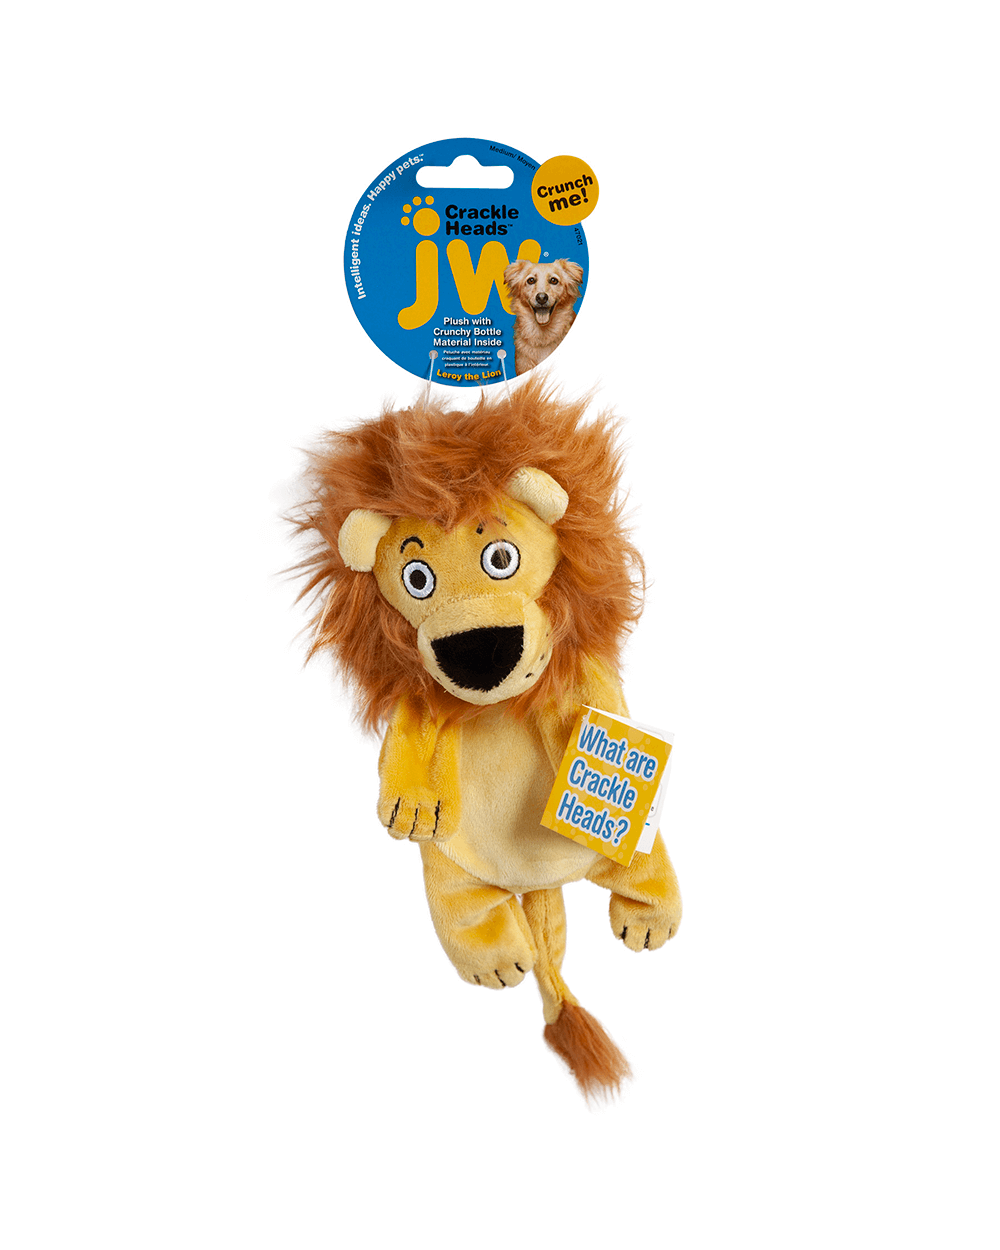 Crackle Heads Leroy the Lion Dog Toy